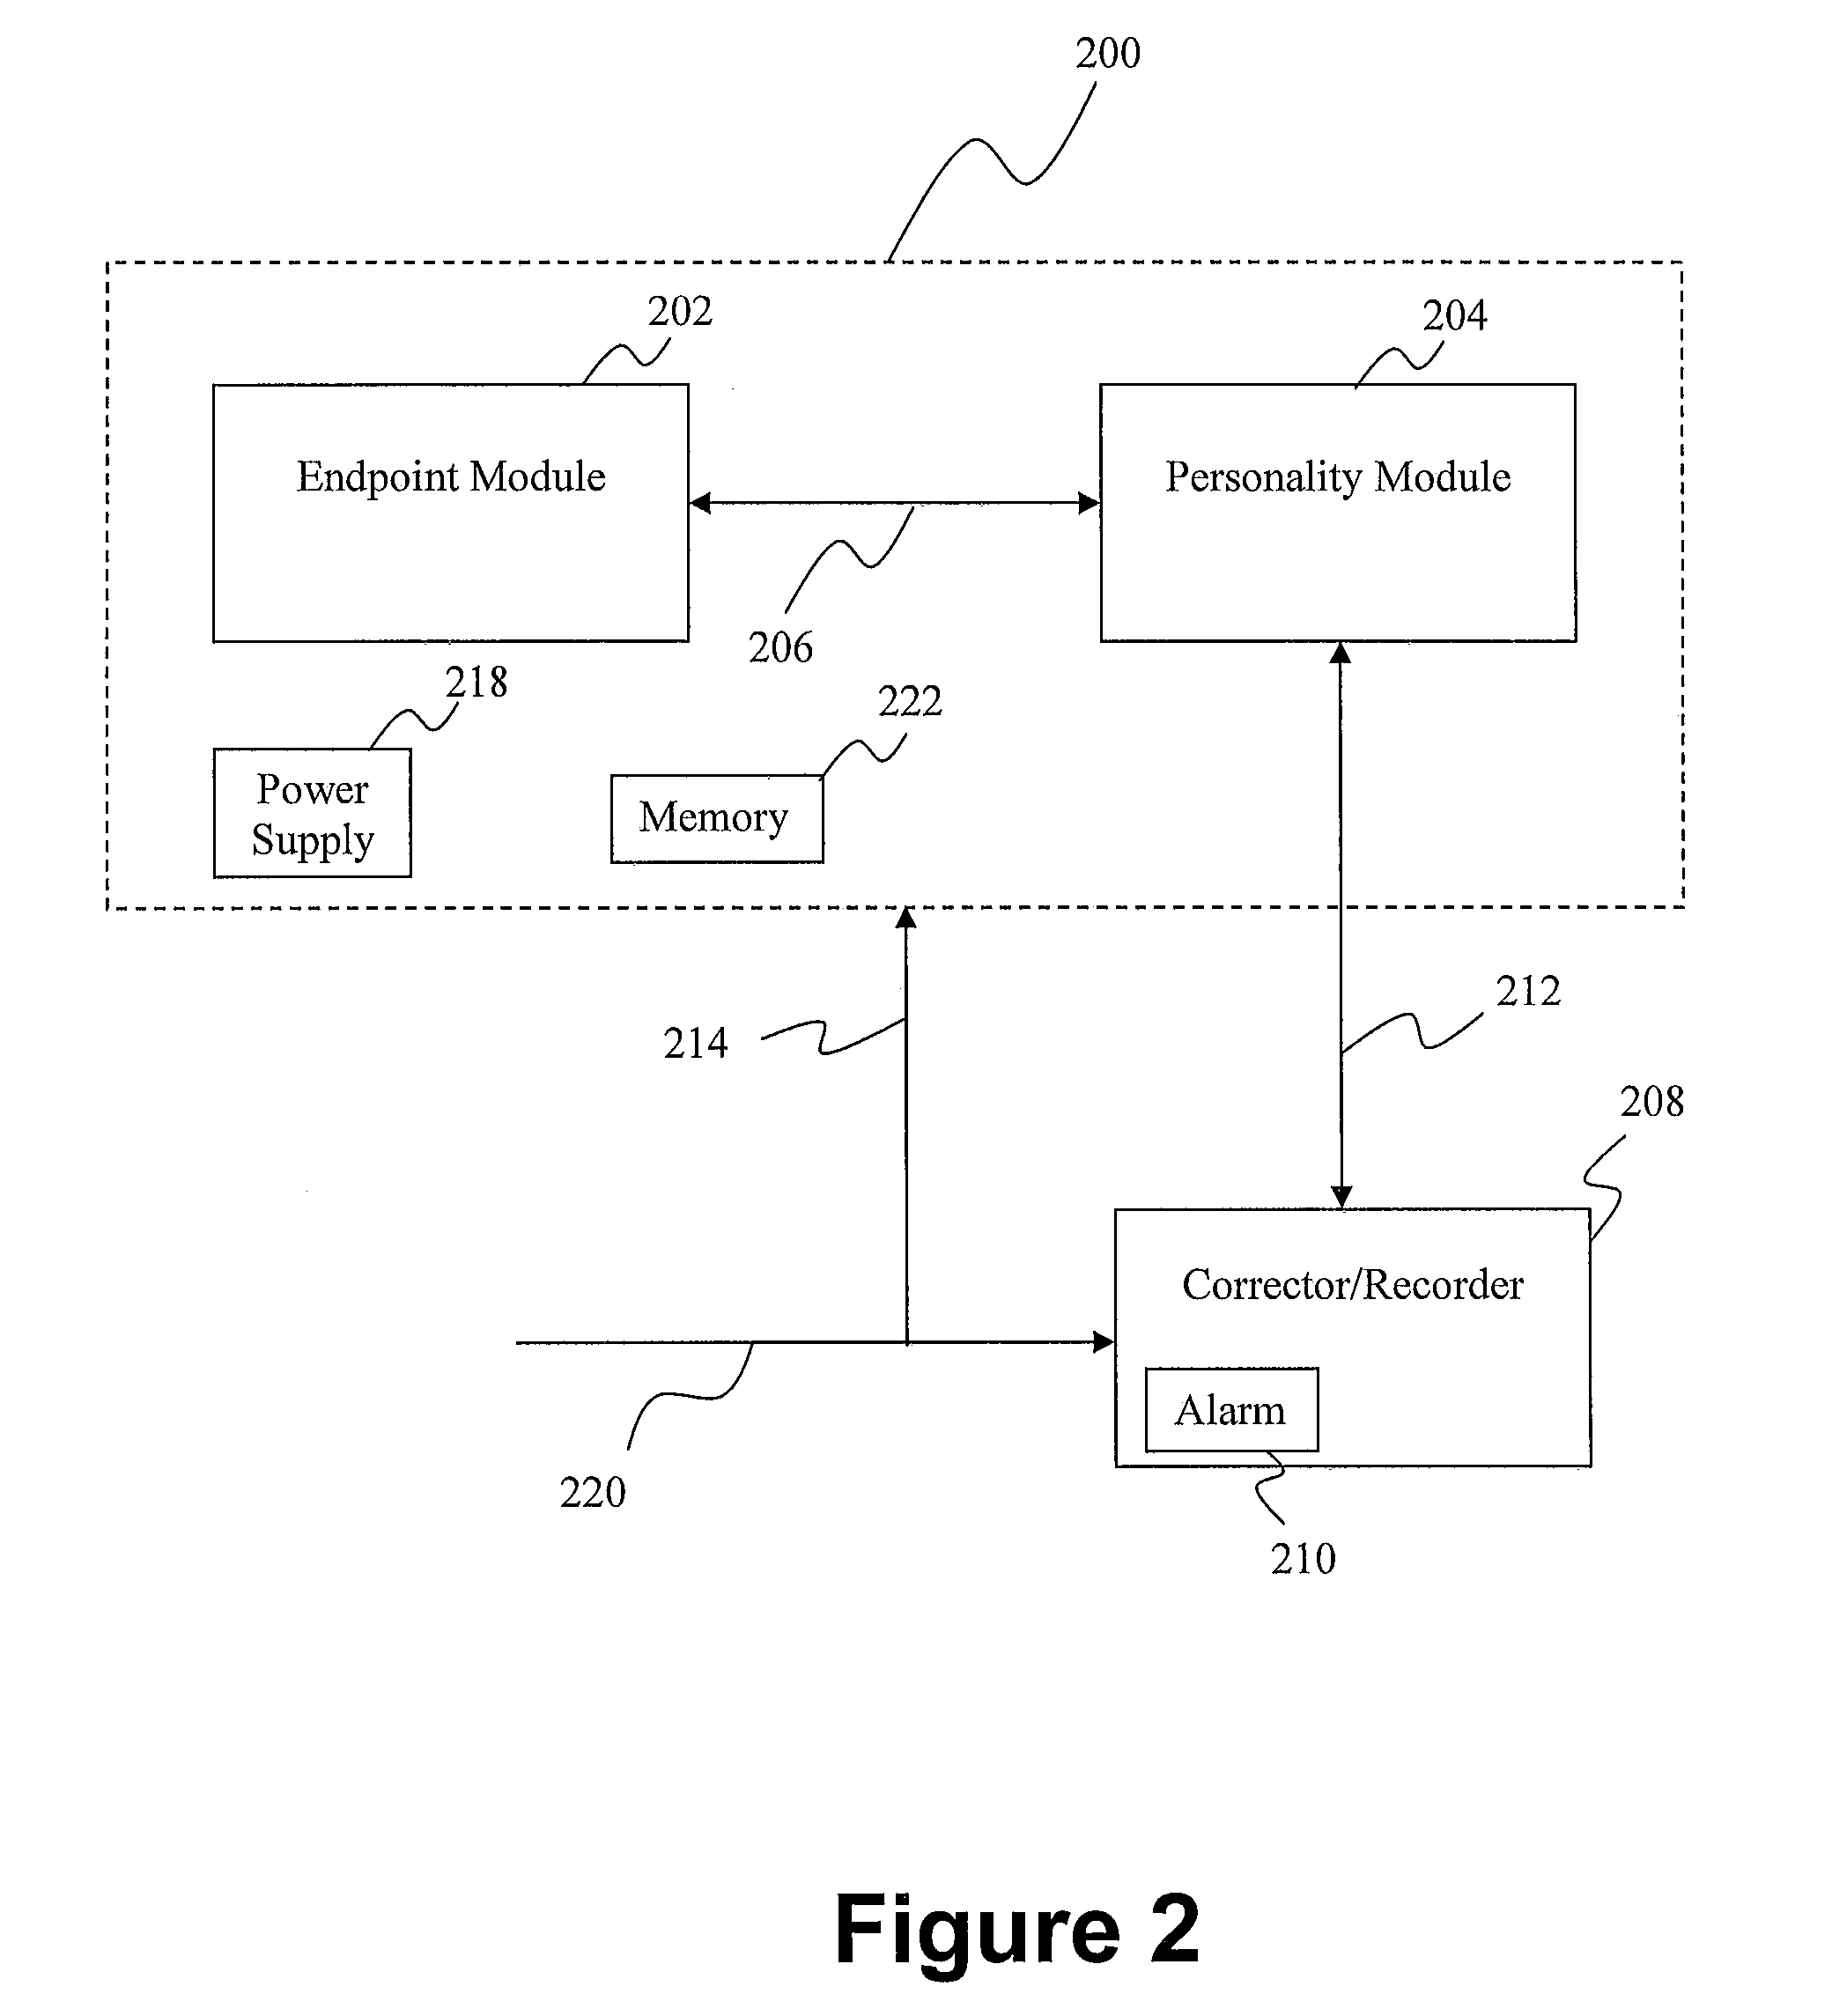 Collection of telemetry data through a meter reading system